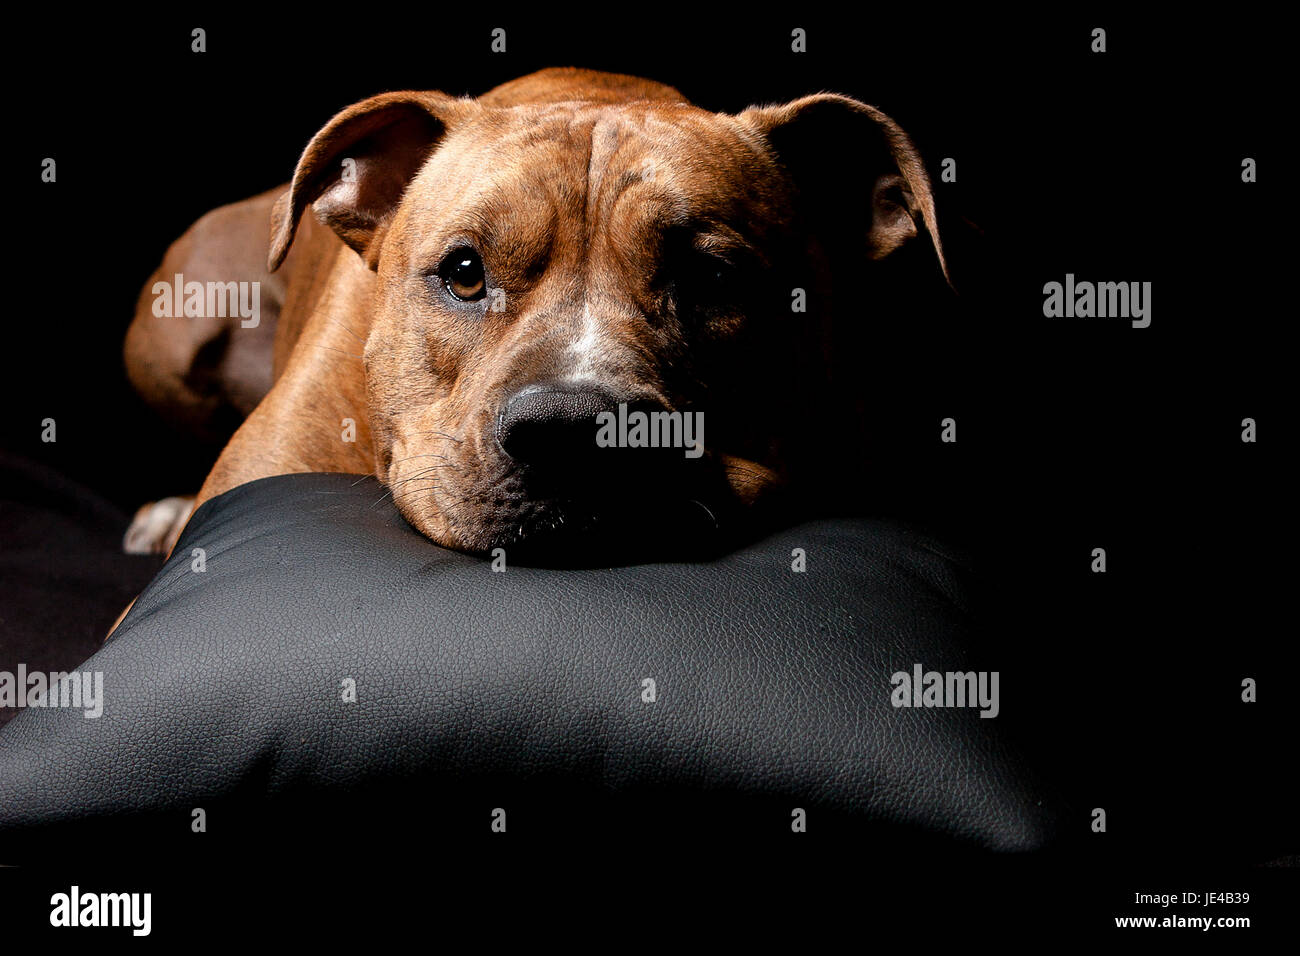 american staffordshire terrier Stock Photo